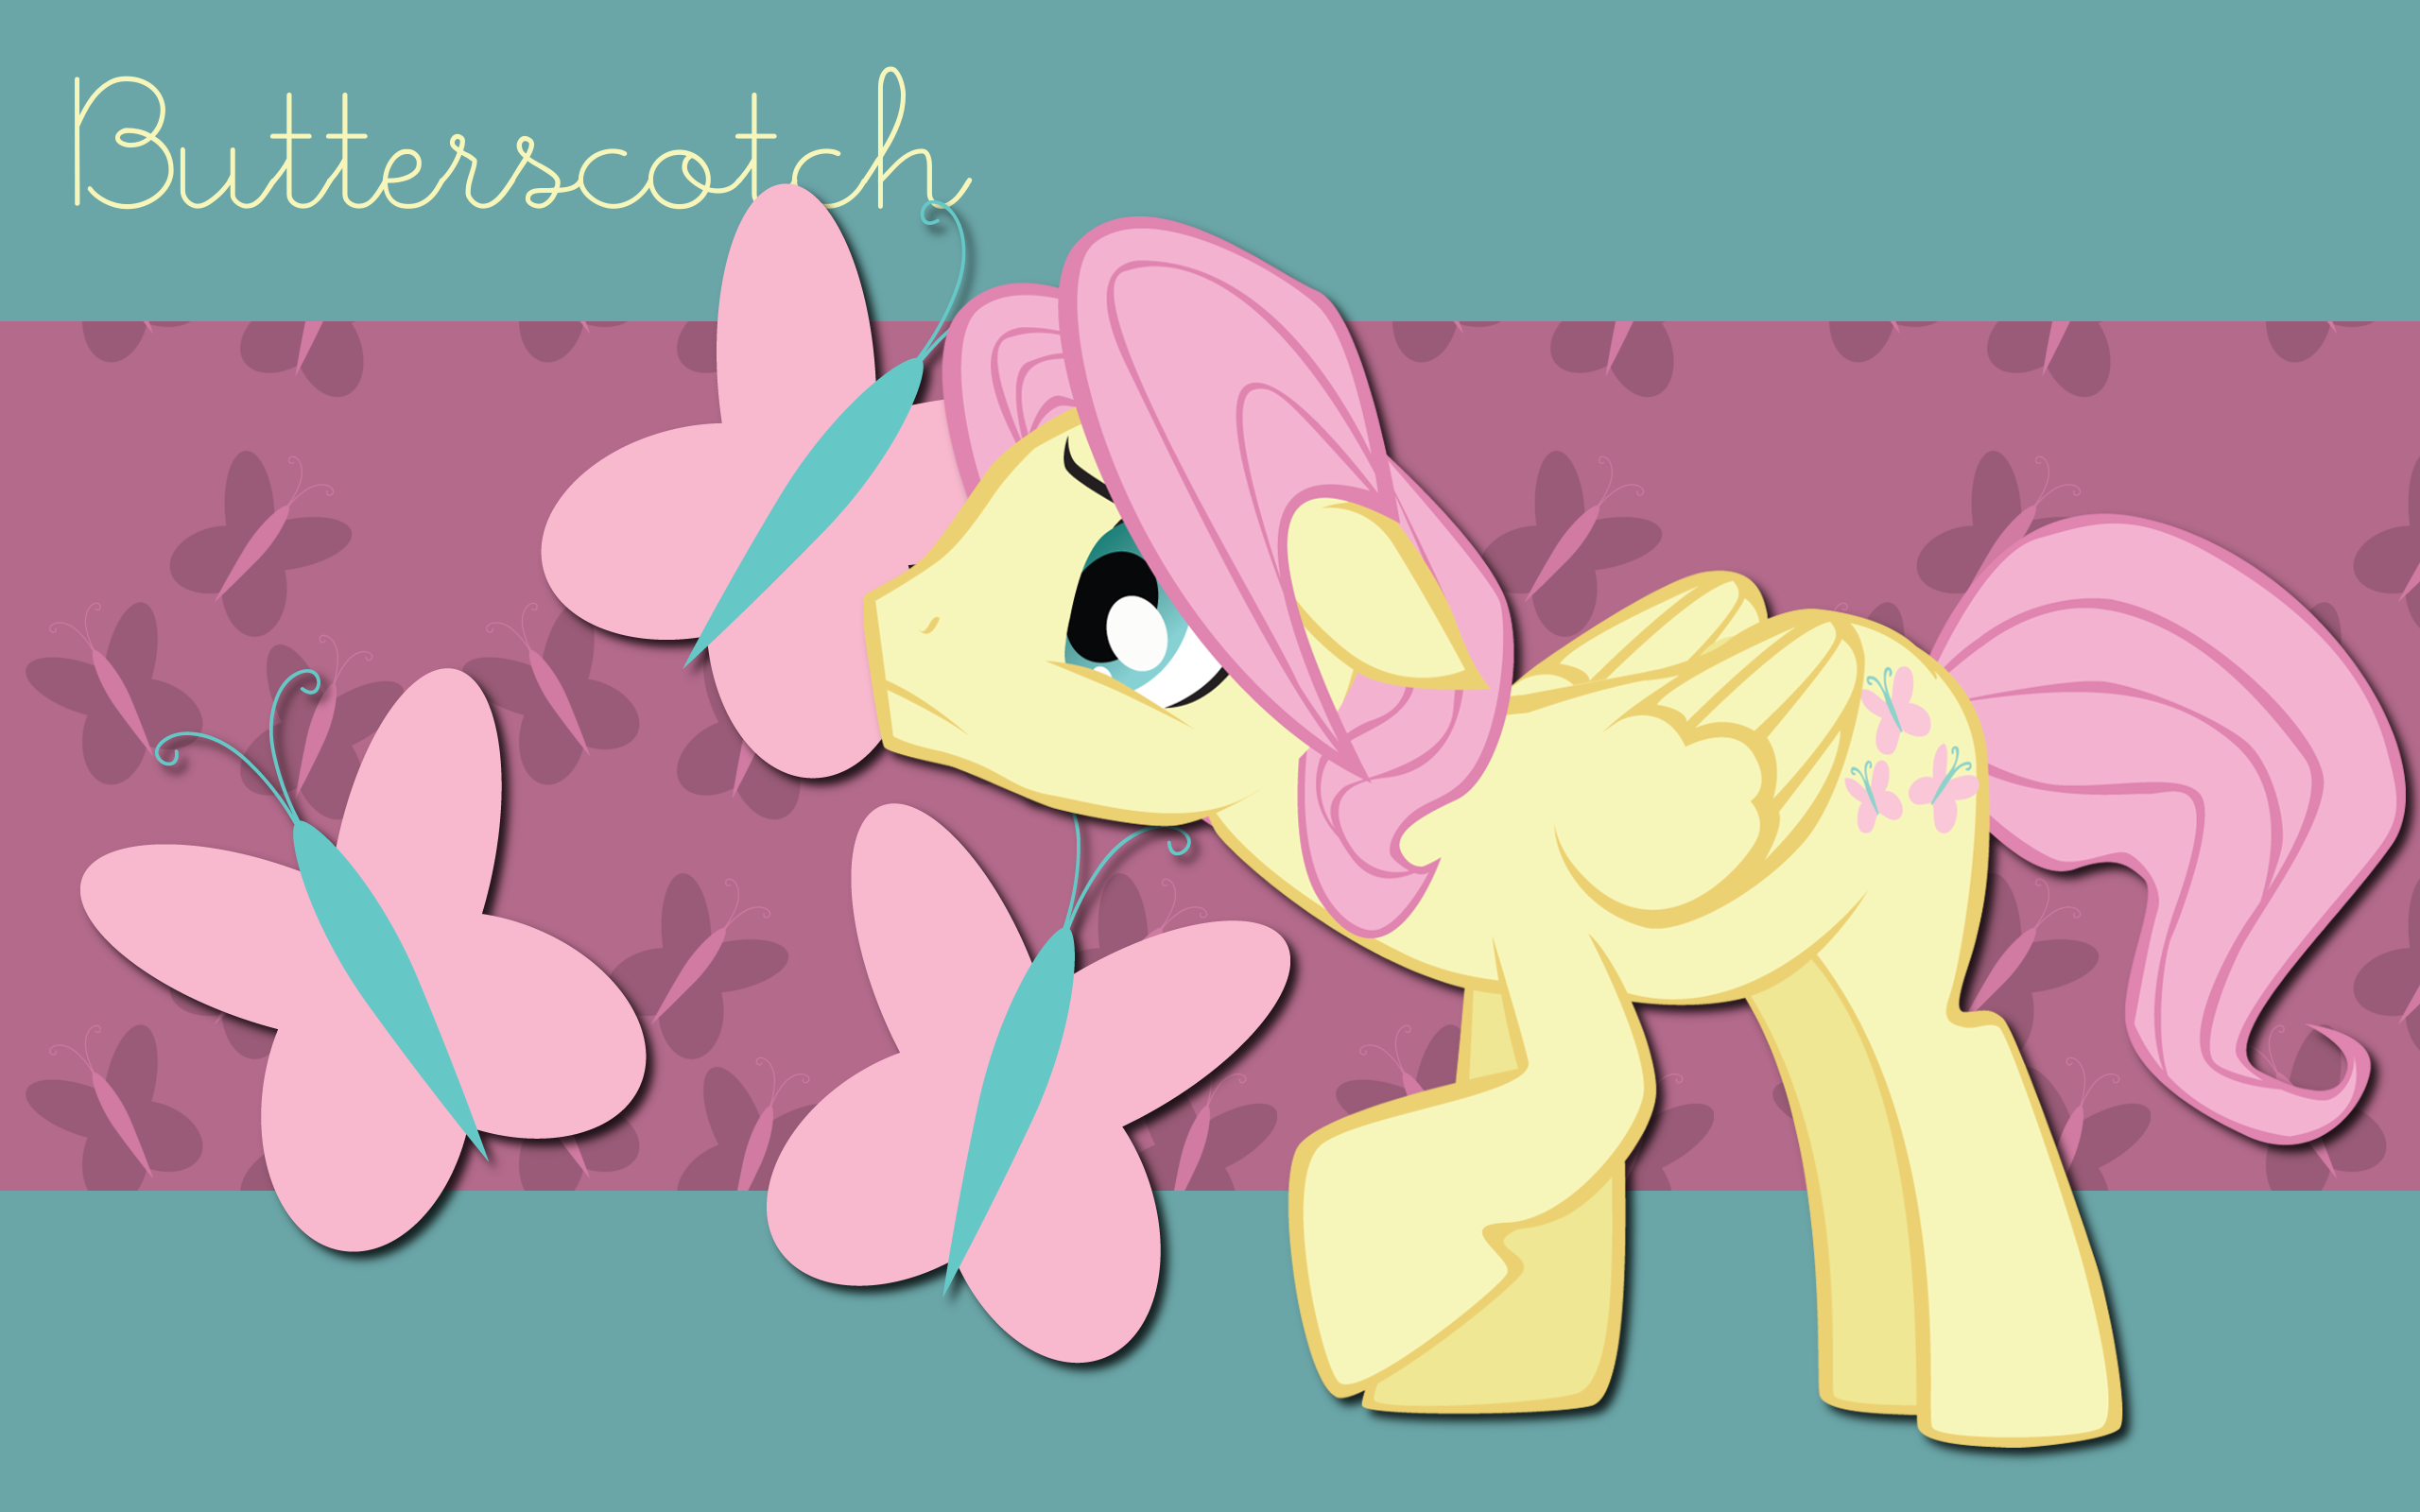 Butterscotch WP by AliceHumanSacrifice0, ooklah and Trotsworth